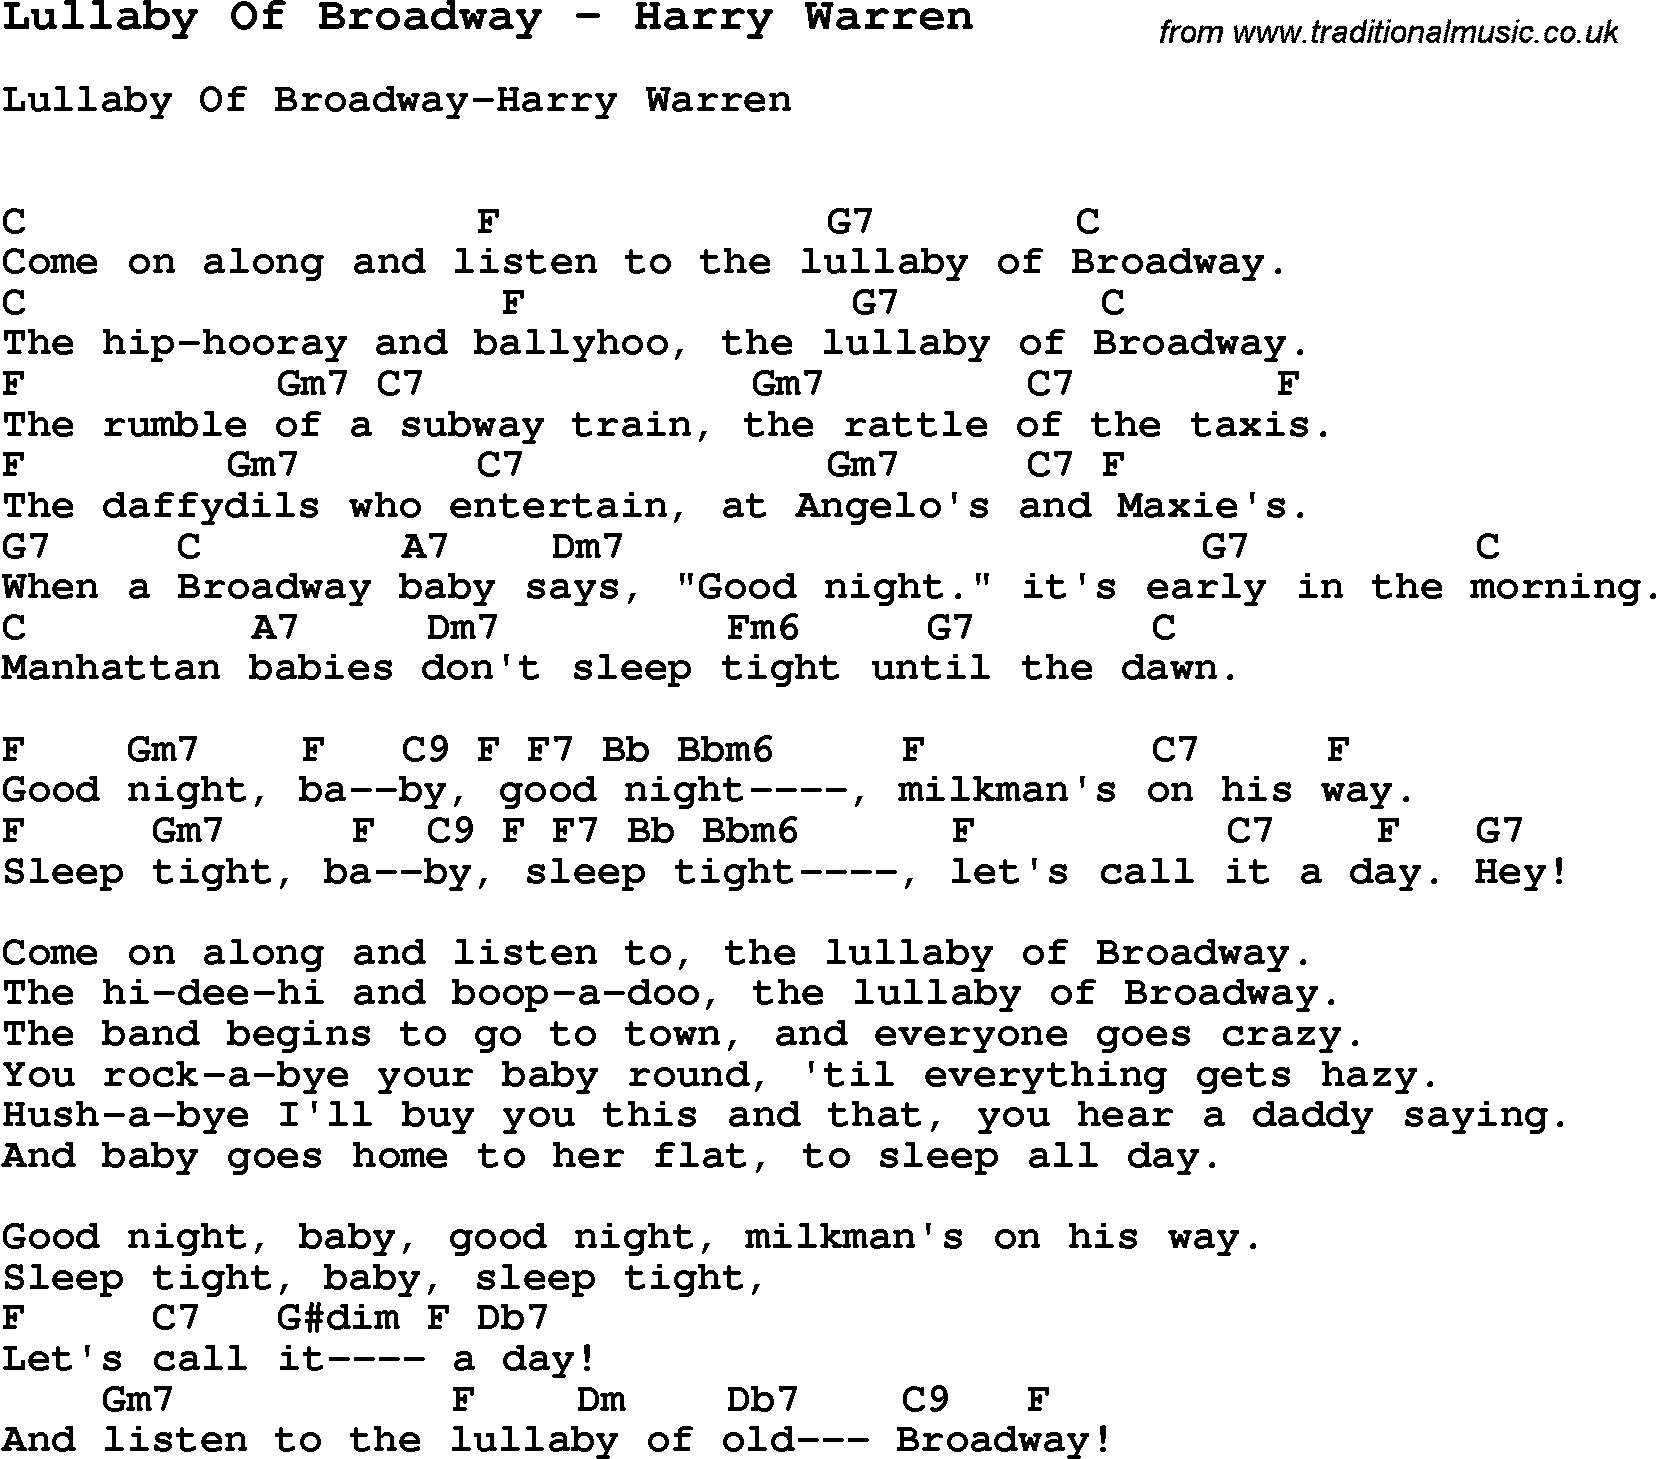 Song Lullaby Of Broadway by Harry Warren, with lyrics for vocal performance and accompaniment chords for Ukulele, Guitar Banjo etc.